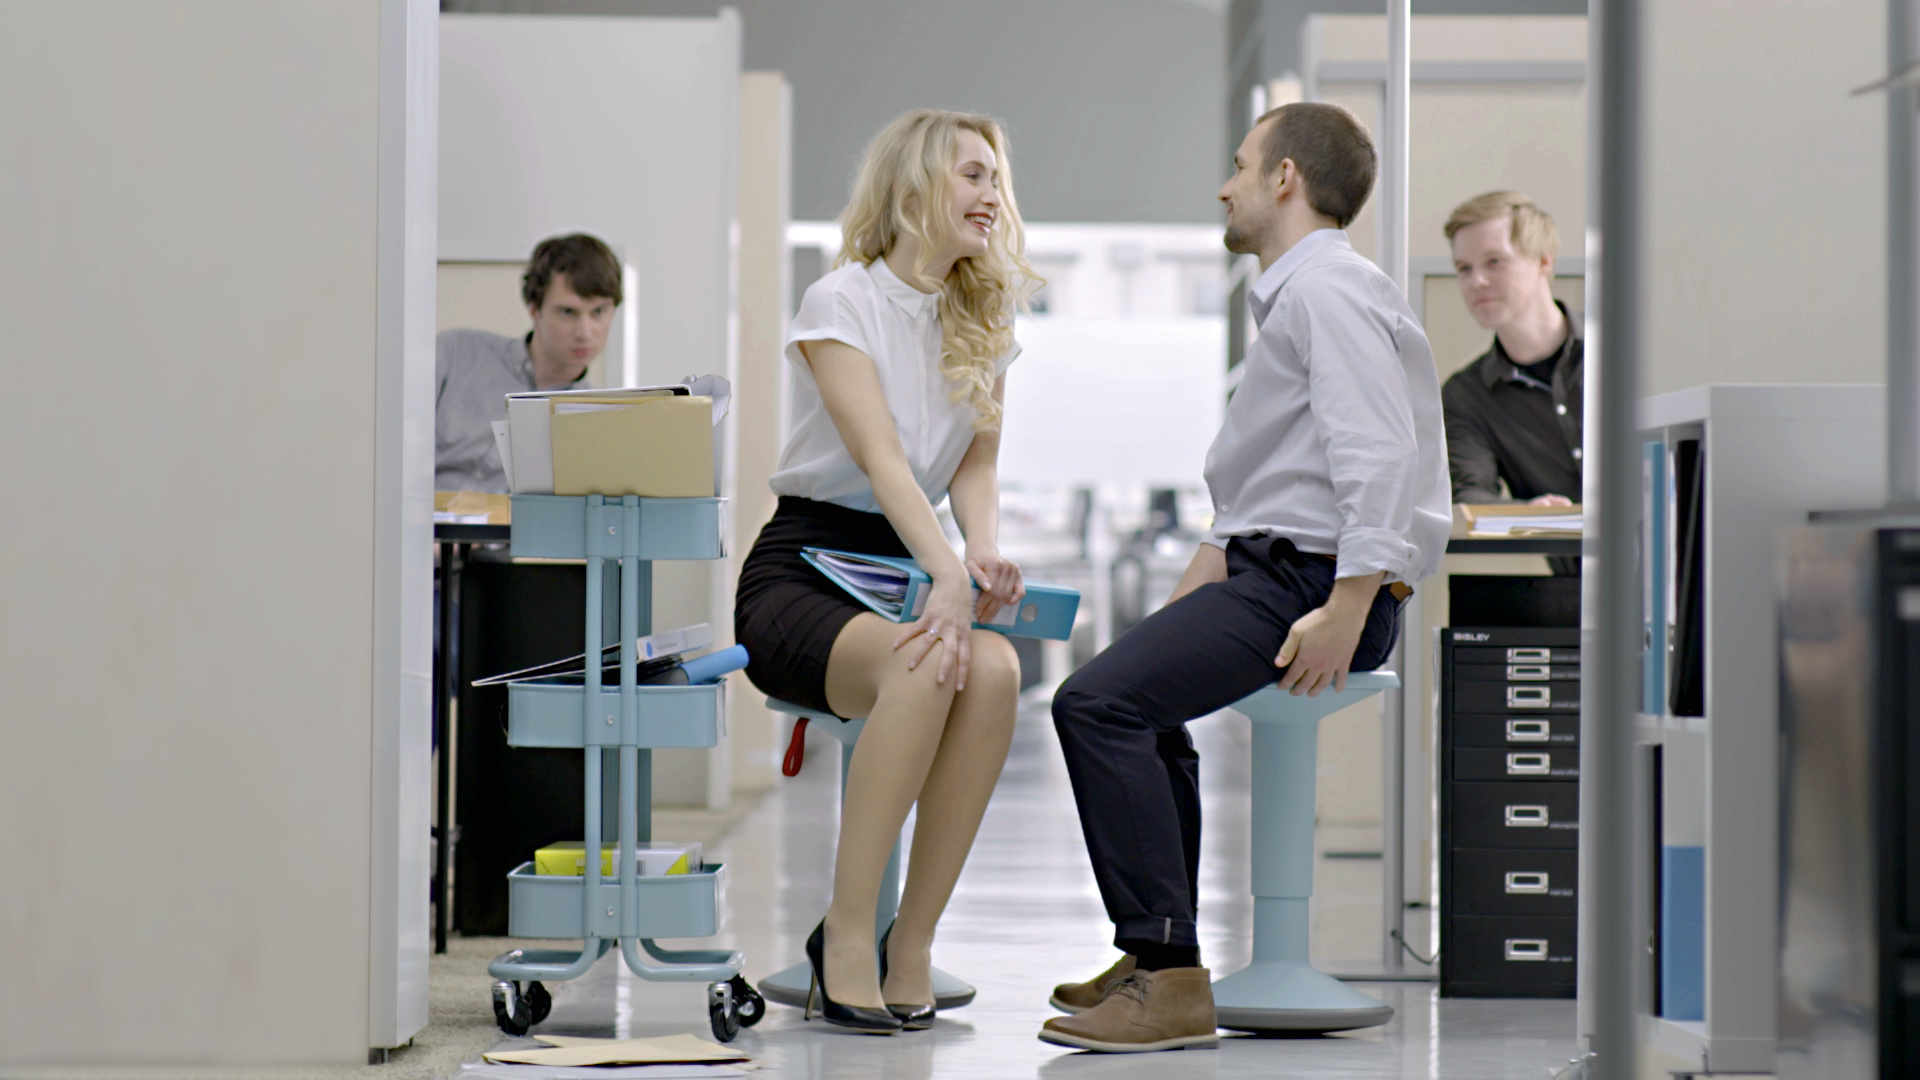 two workers sitting on adjustable stools in office hallway